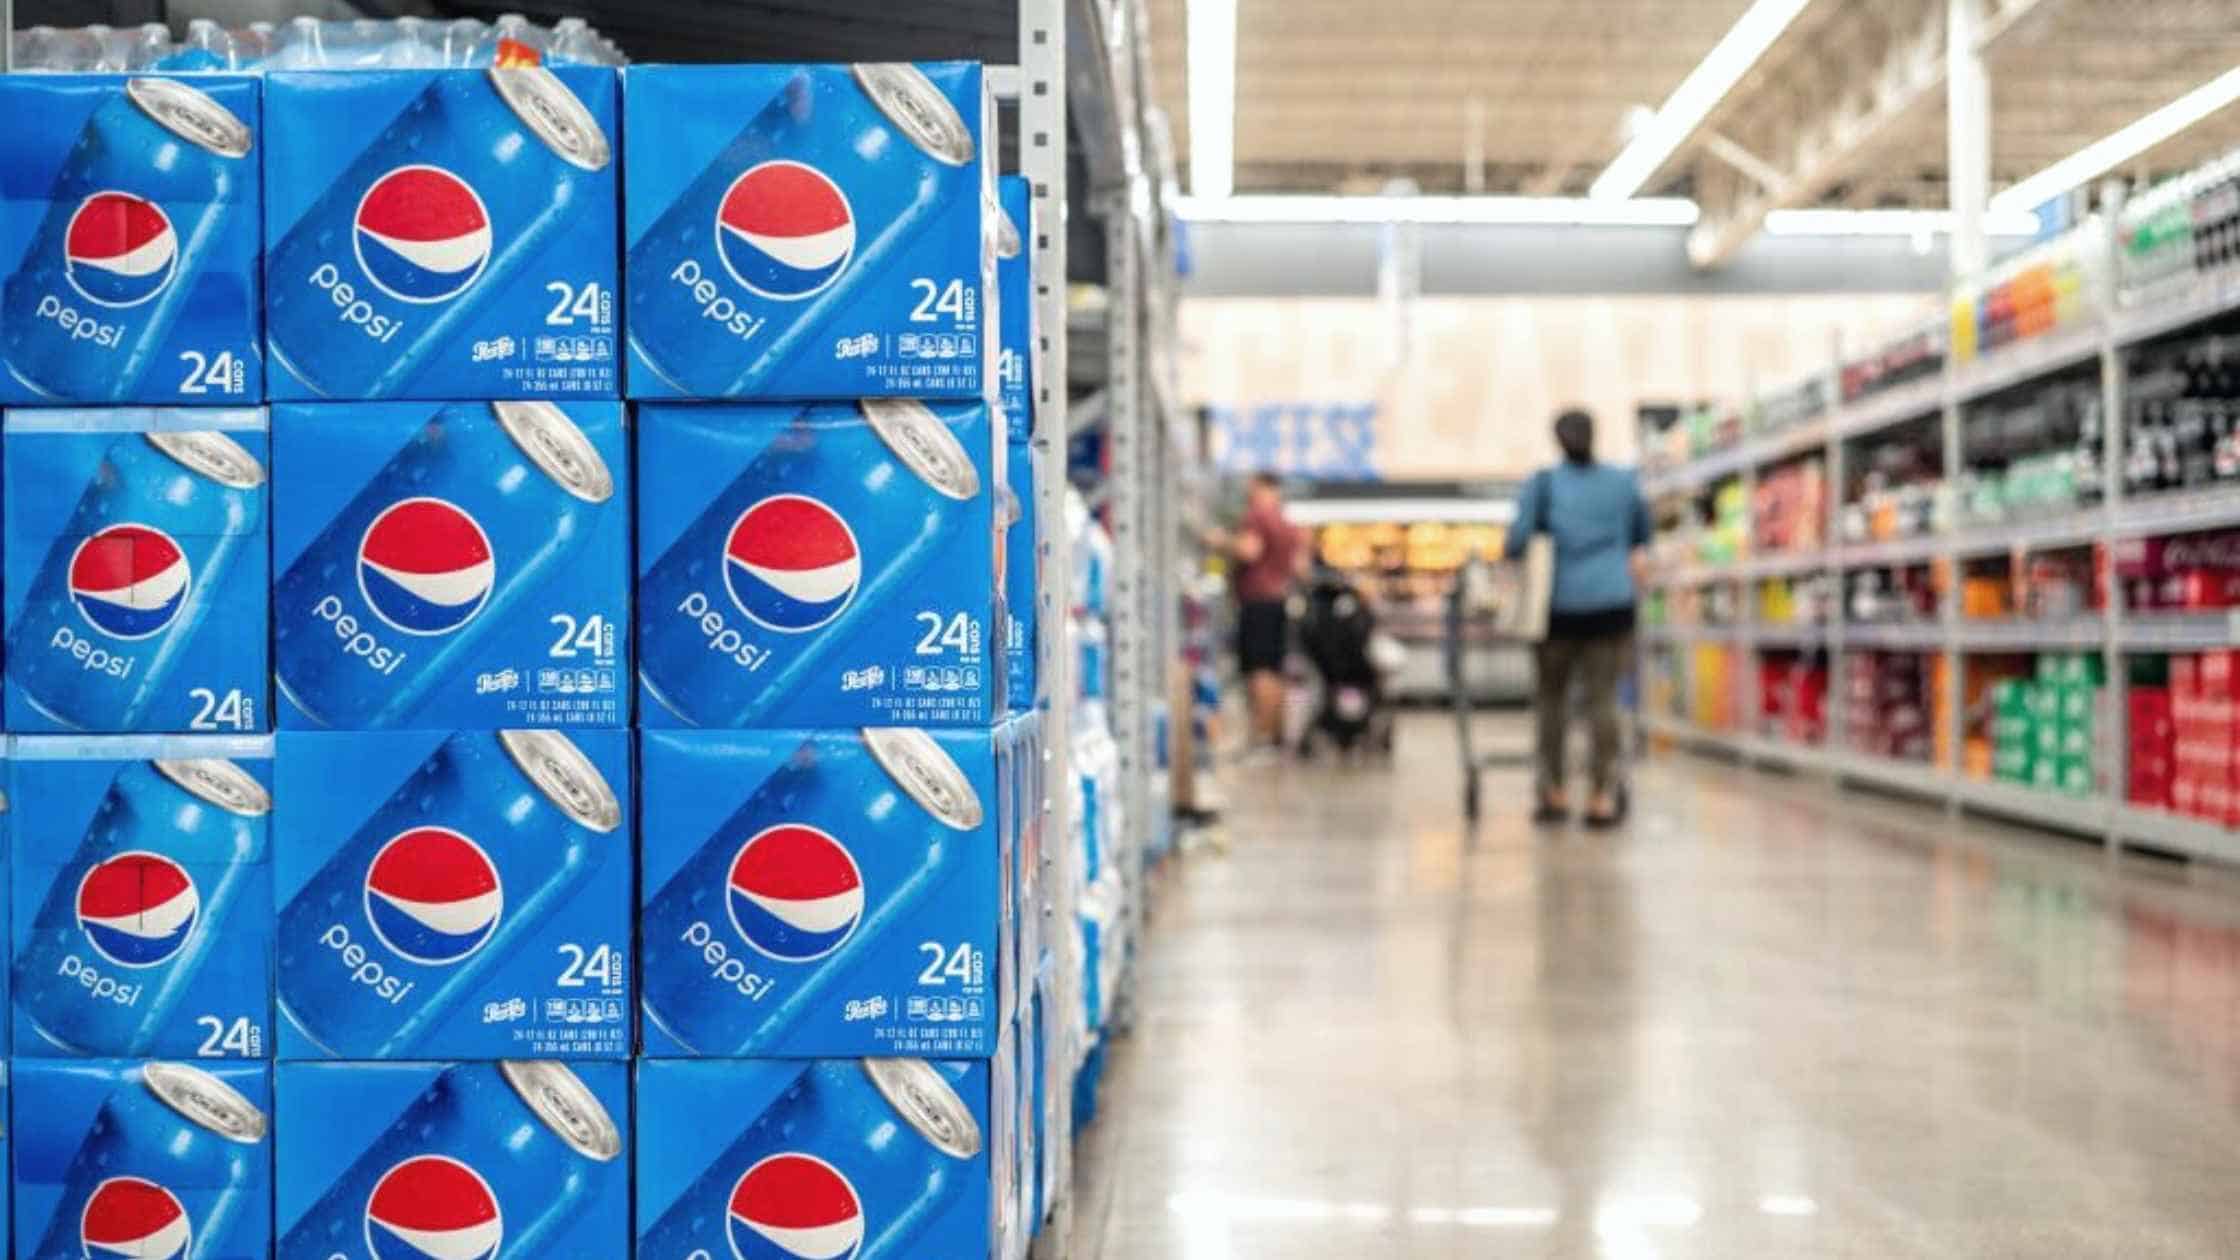 PepsiCo To Lay Off Hundreds Of Workers In Its Snacks & Beverages Divisions